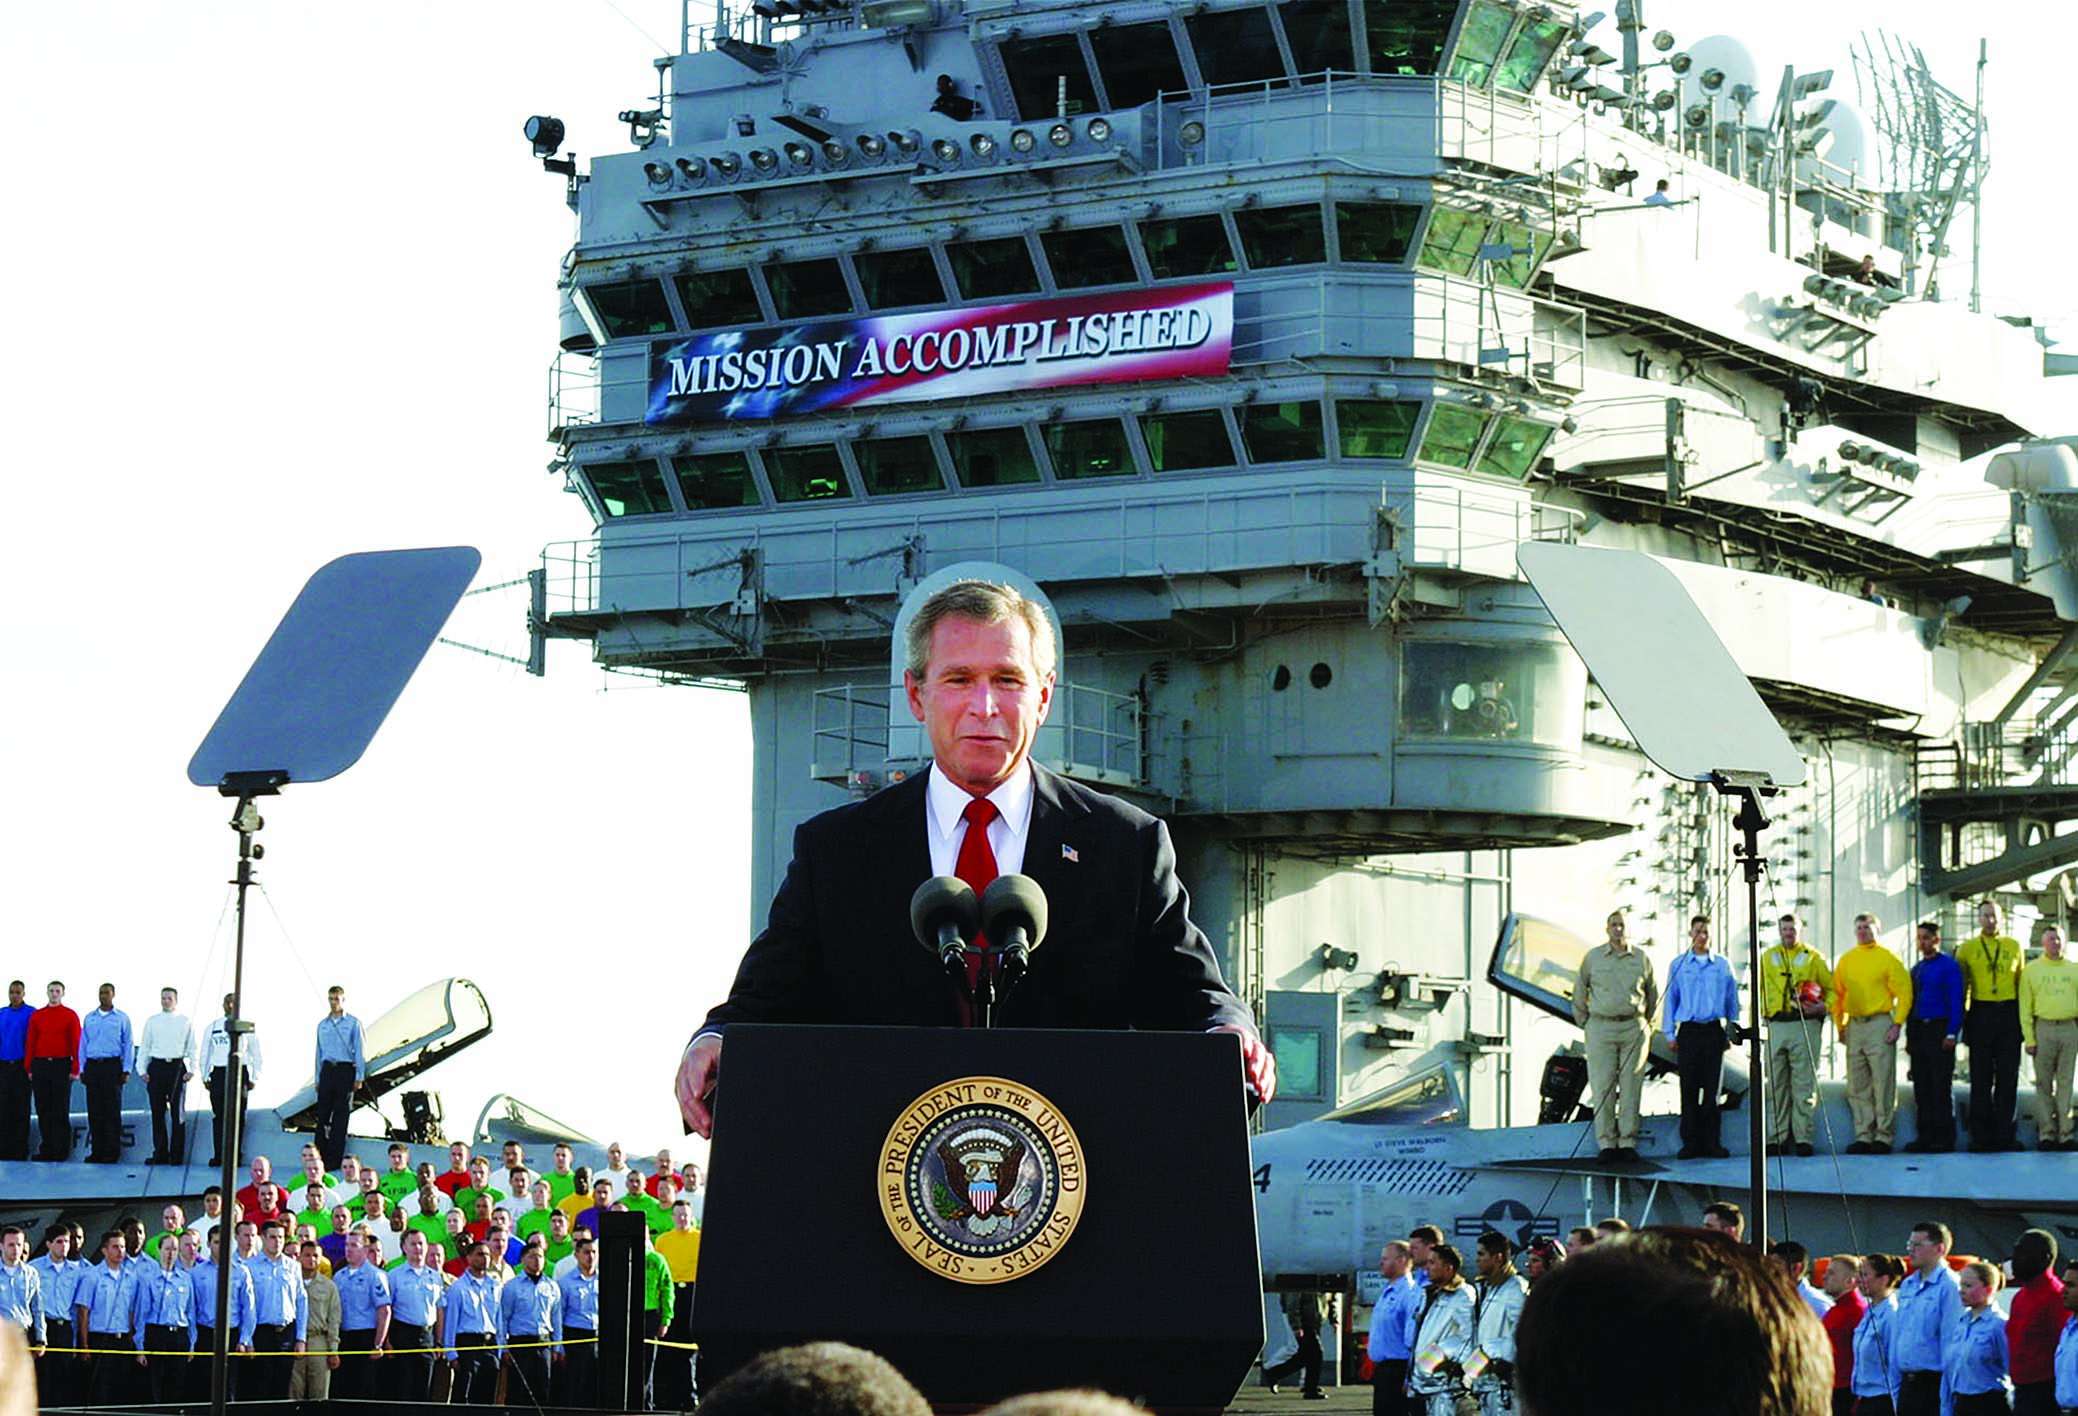 George W. Bush declares the mission accomplished in Iraq.